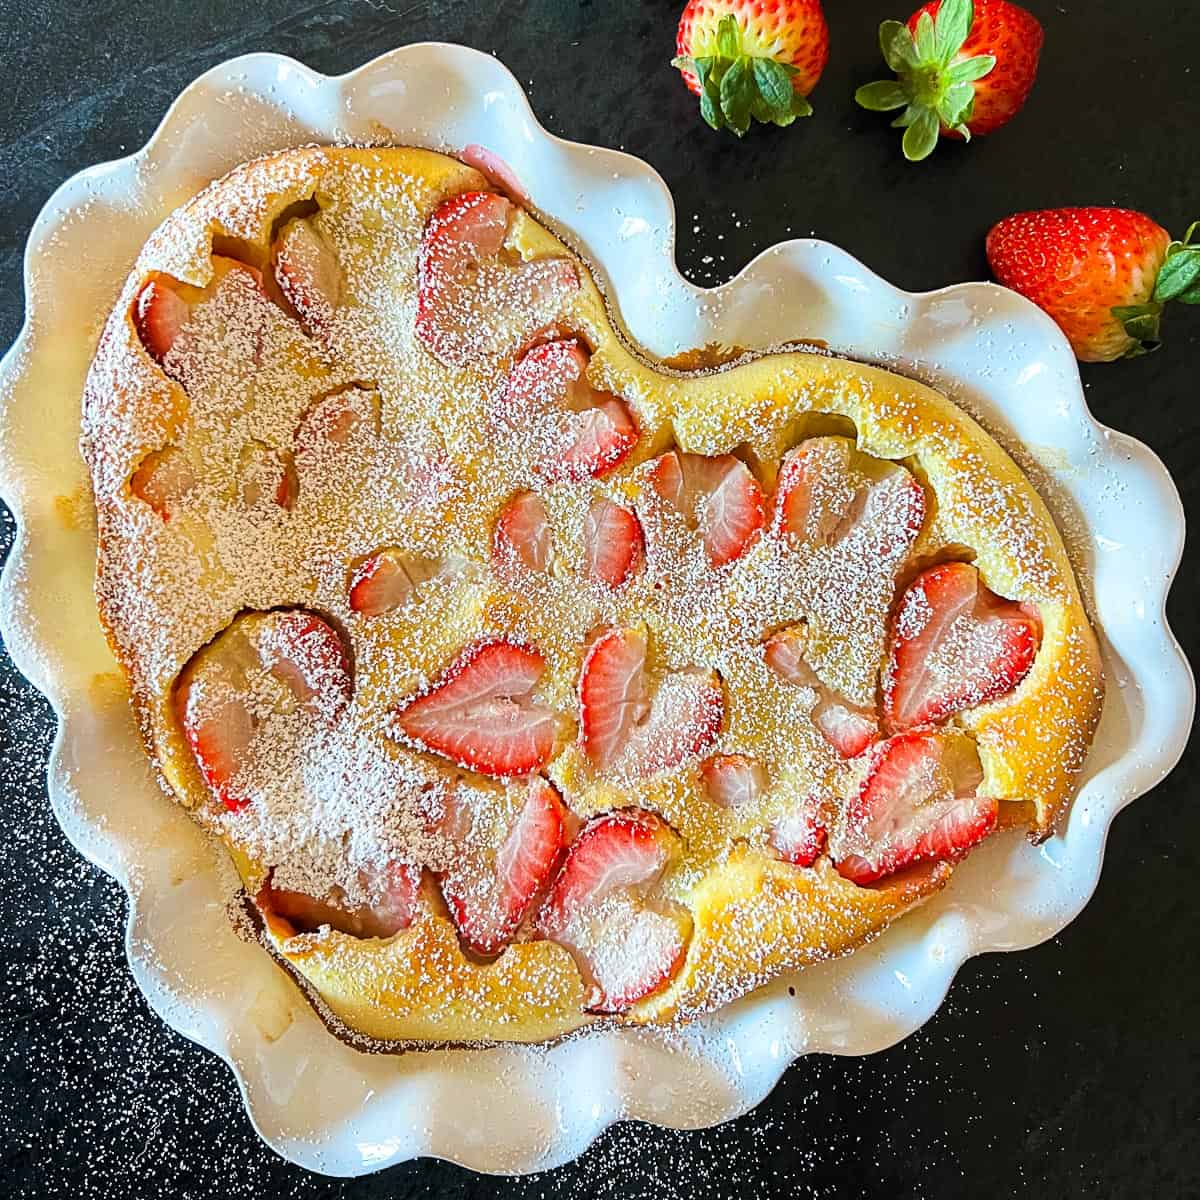 A strawberry clafoutis in a heart shaped pie dish. pictured with scattered berries